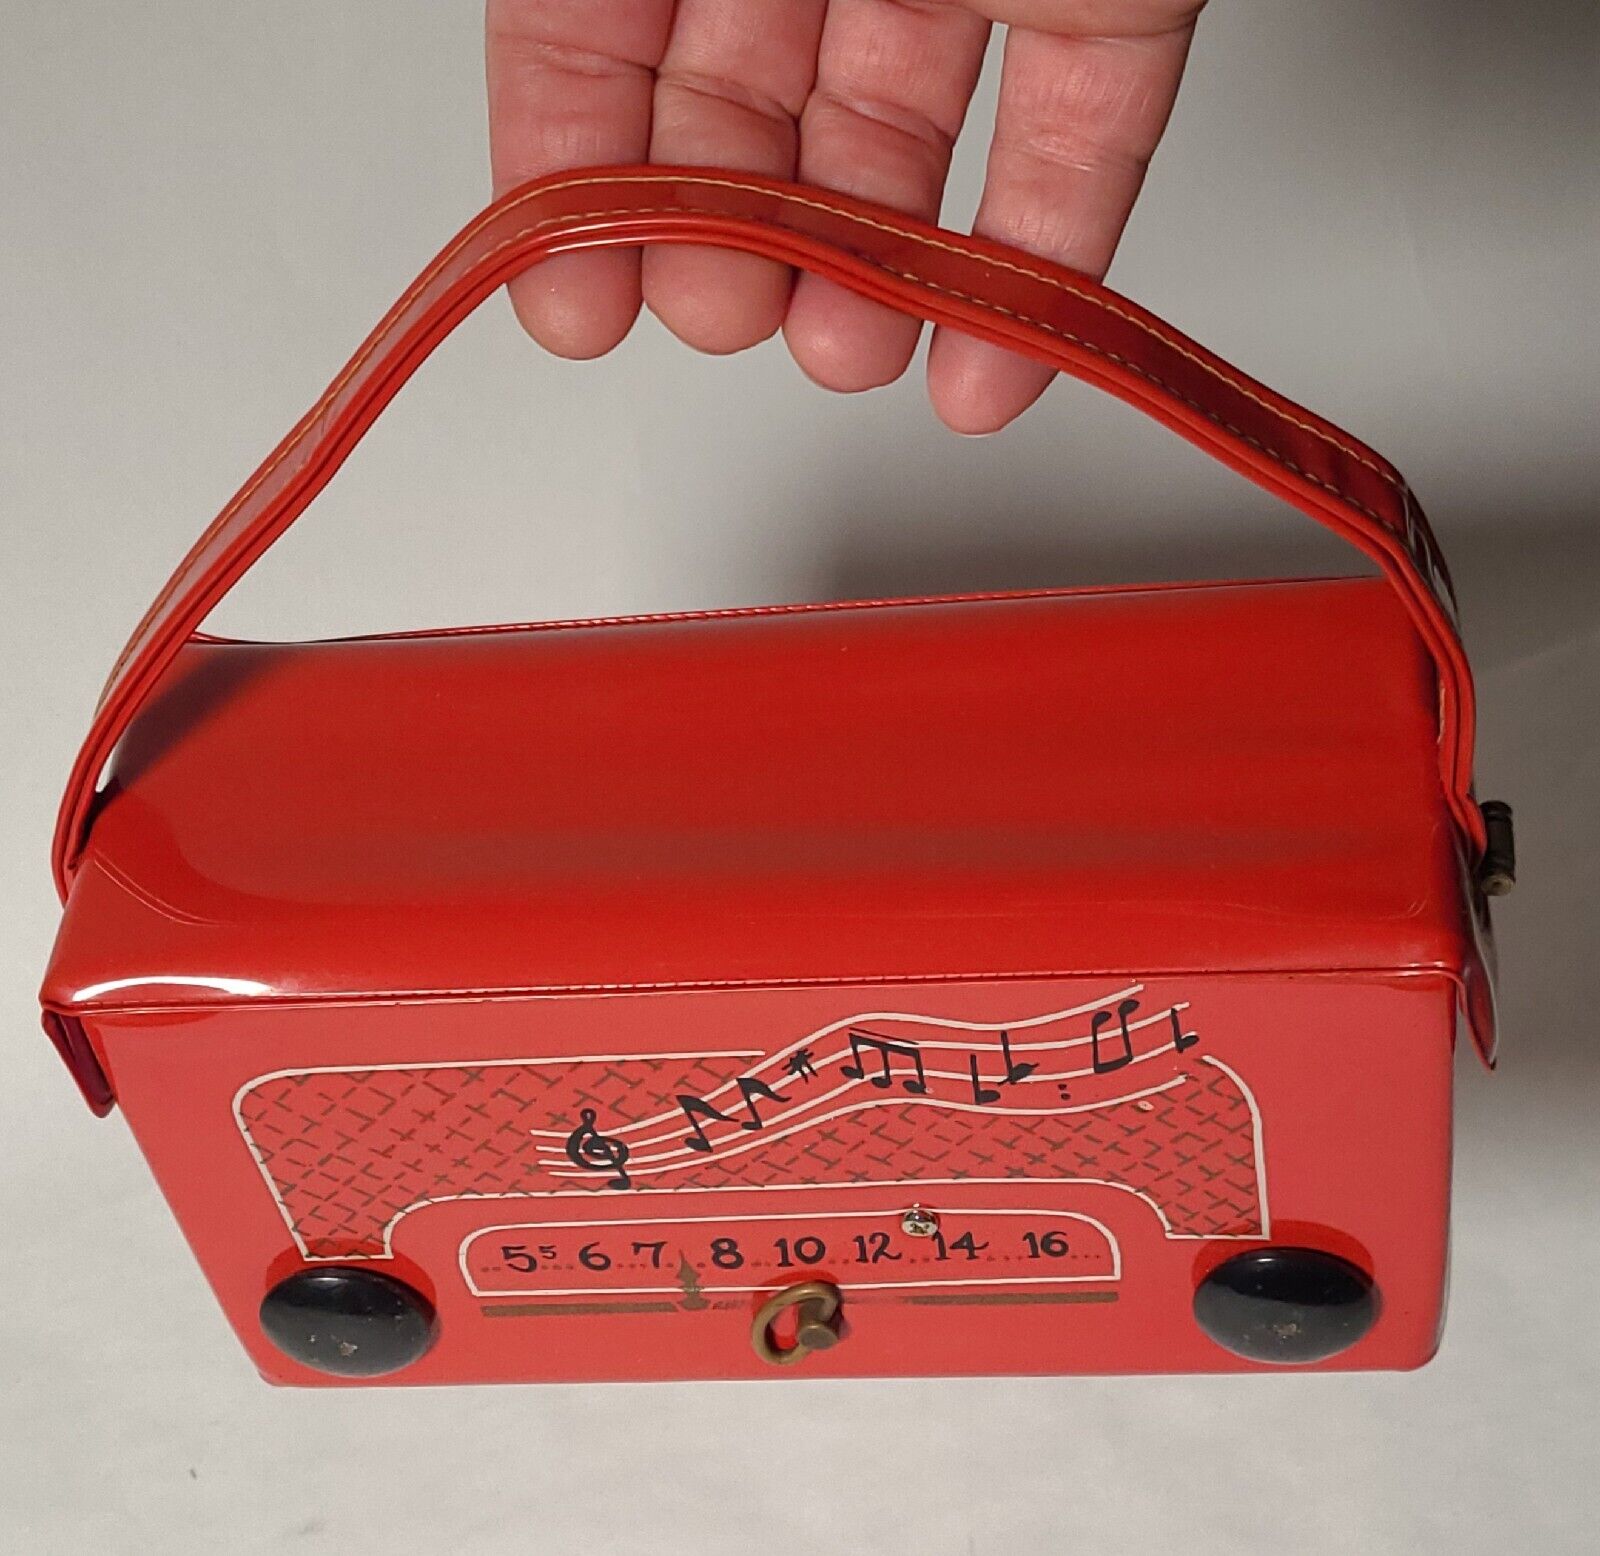 1950s RARE Red Vynil Wind-up Music Box Decorative Purse Clutch. Working Vintage 